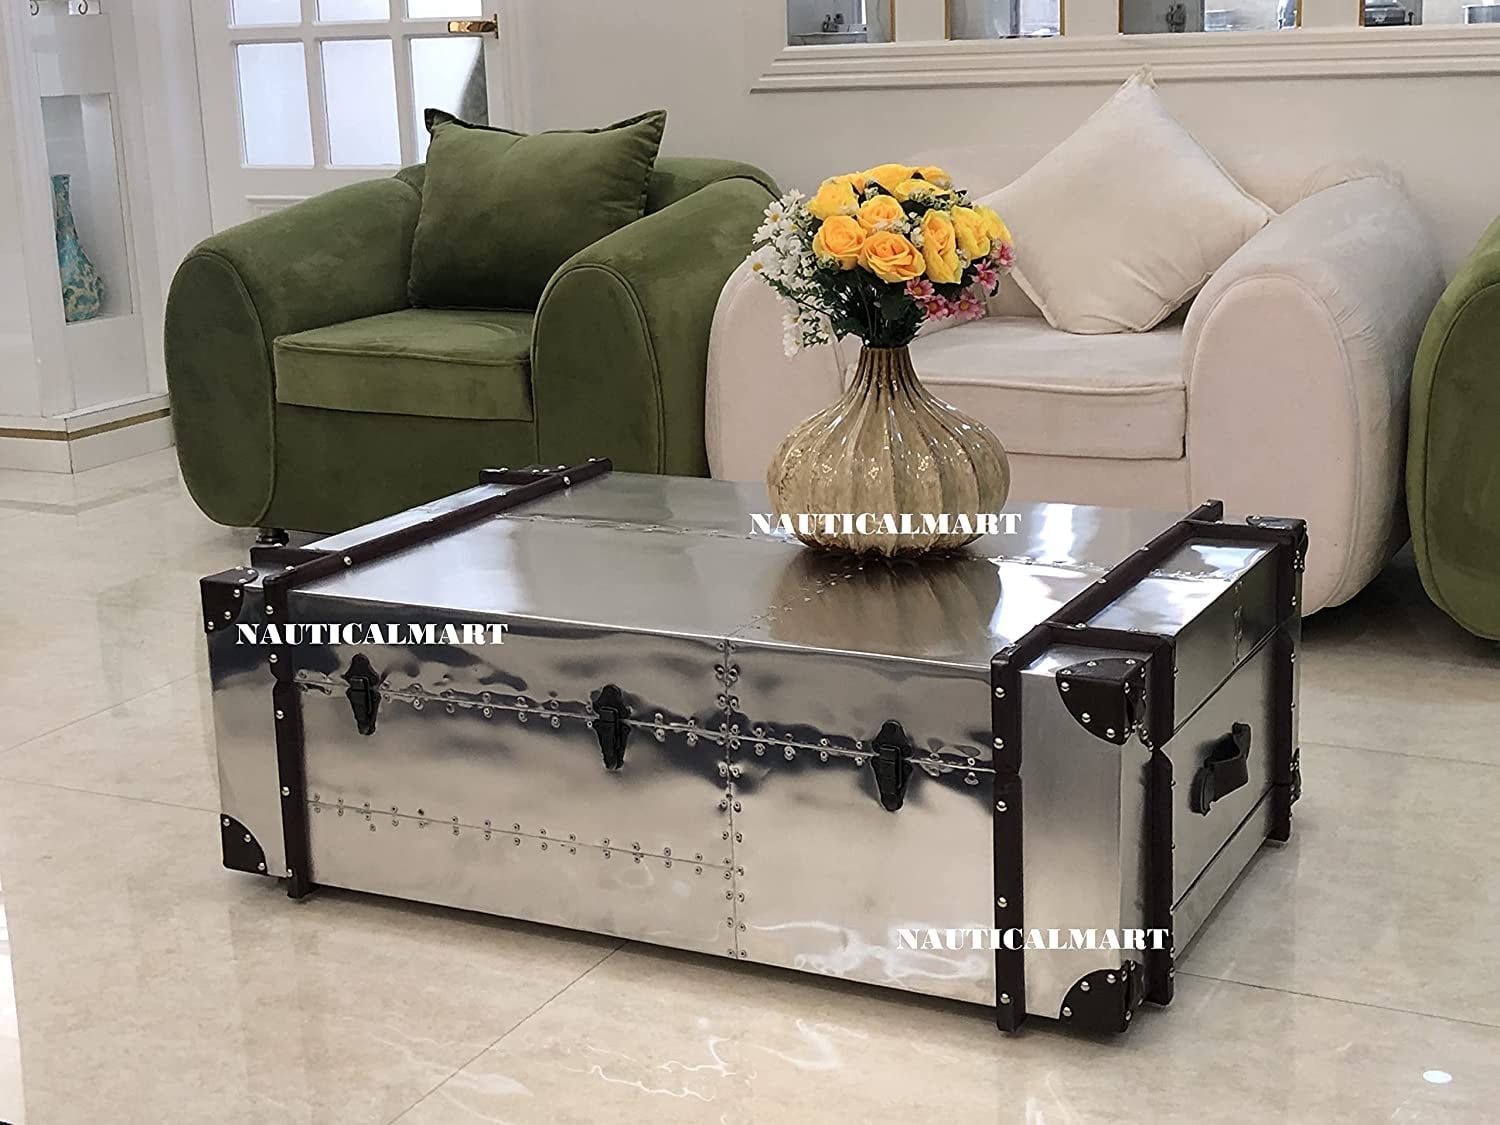 Trunk Design Aluminum Aviator Console Writing Office Desk Table with 6 Drawers, Size: Large, Silver